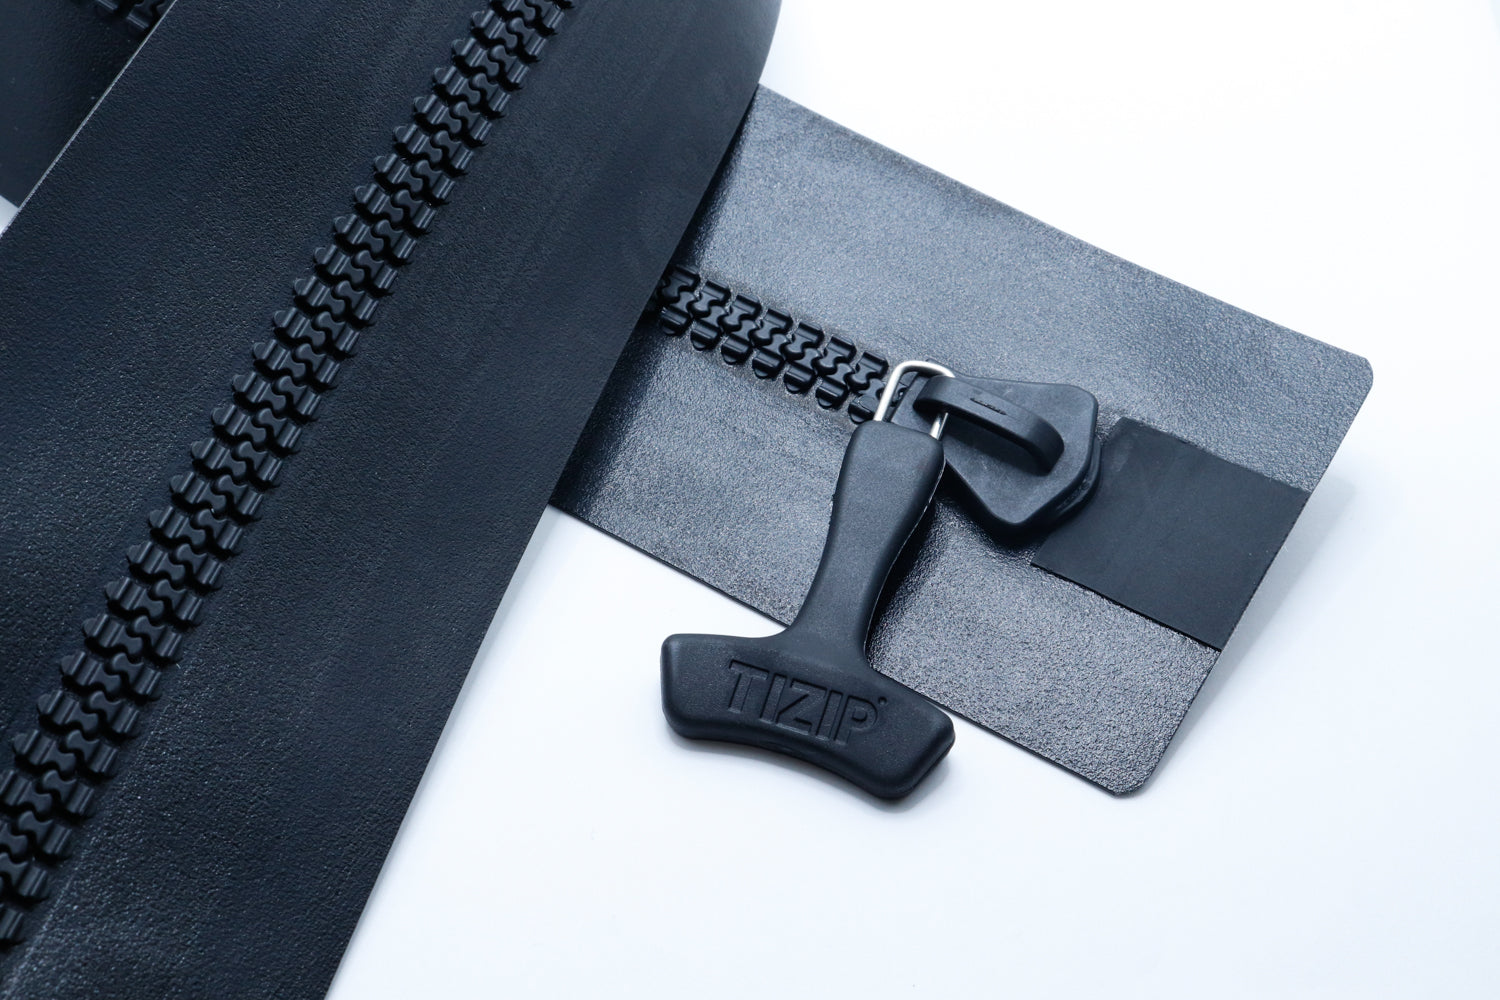 TIZIP® Zippers: The Gold Standard in Closure Systems